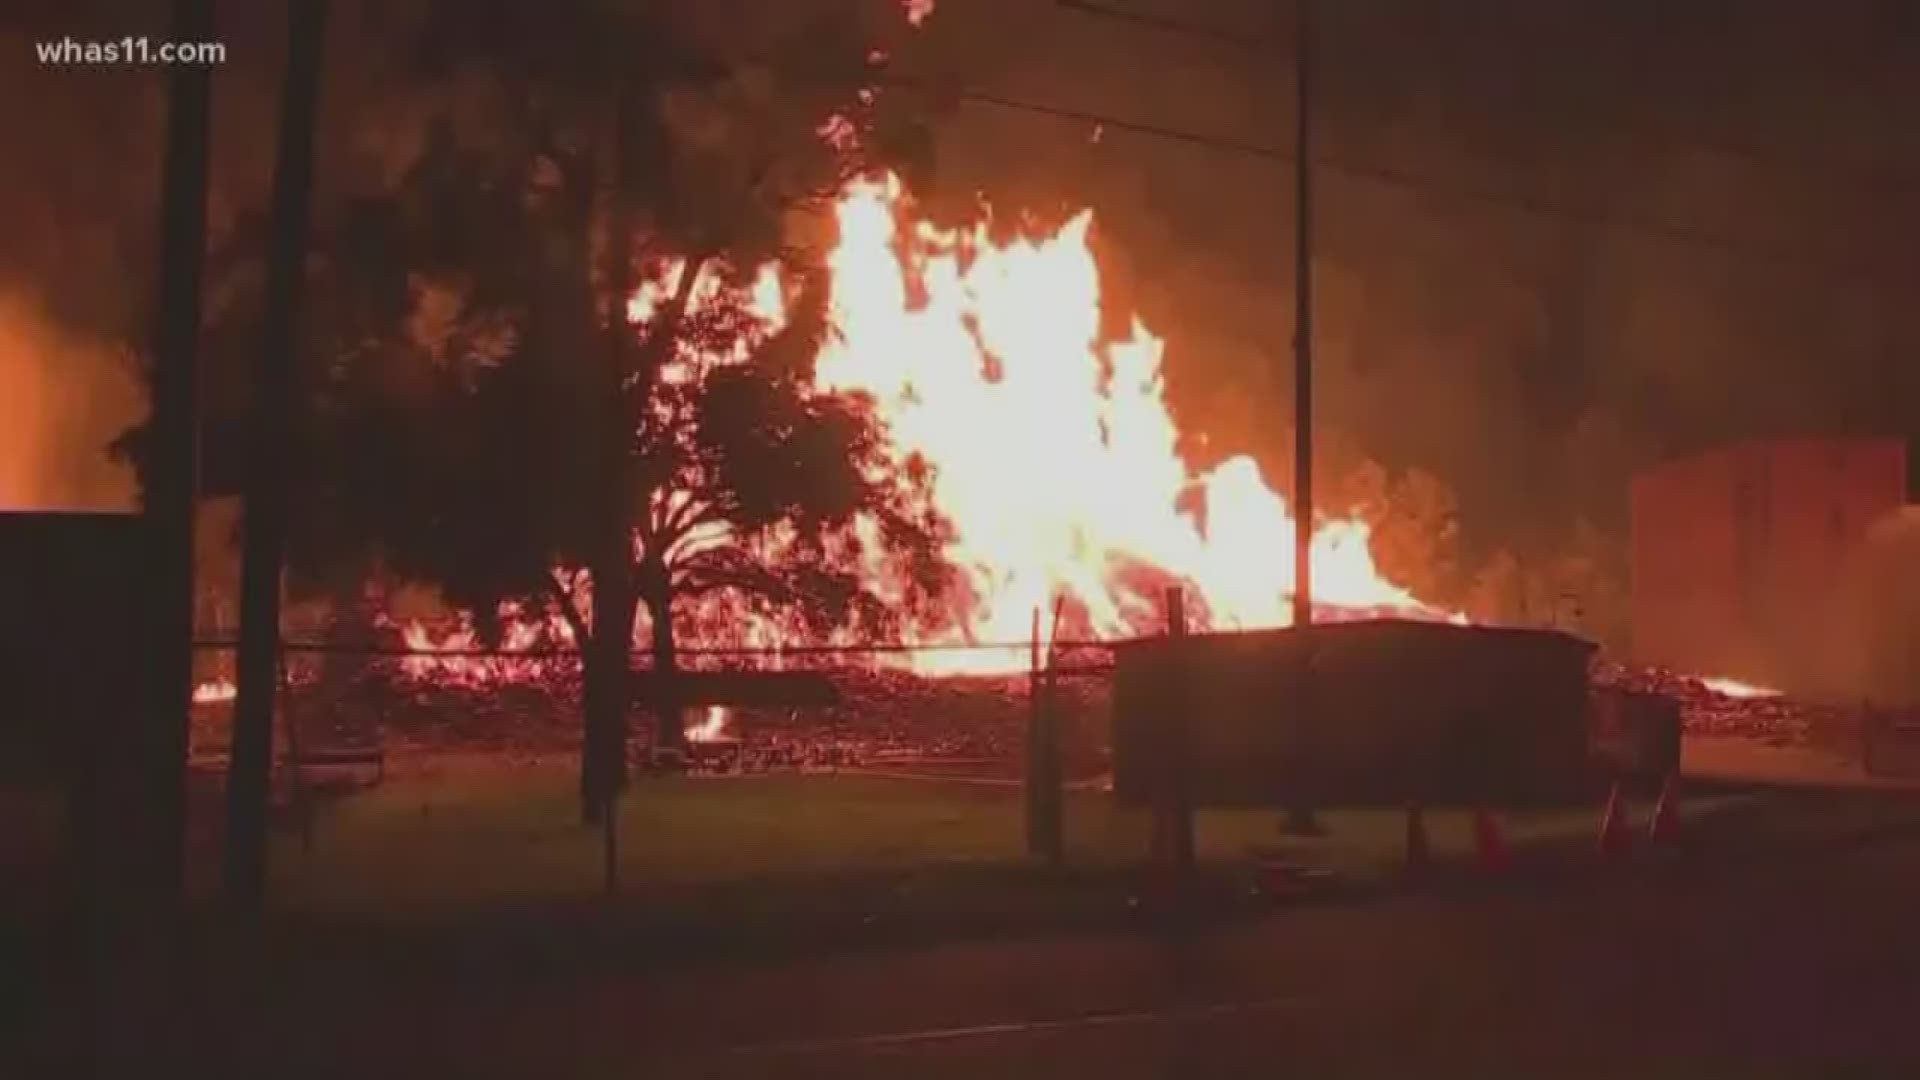 The fire has destroyed as many as 45,000 barrels of Jim Beam bourbon. Officials believe a lightning strike sparked the fire at one of the company's storage houses in Woodford County.